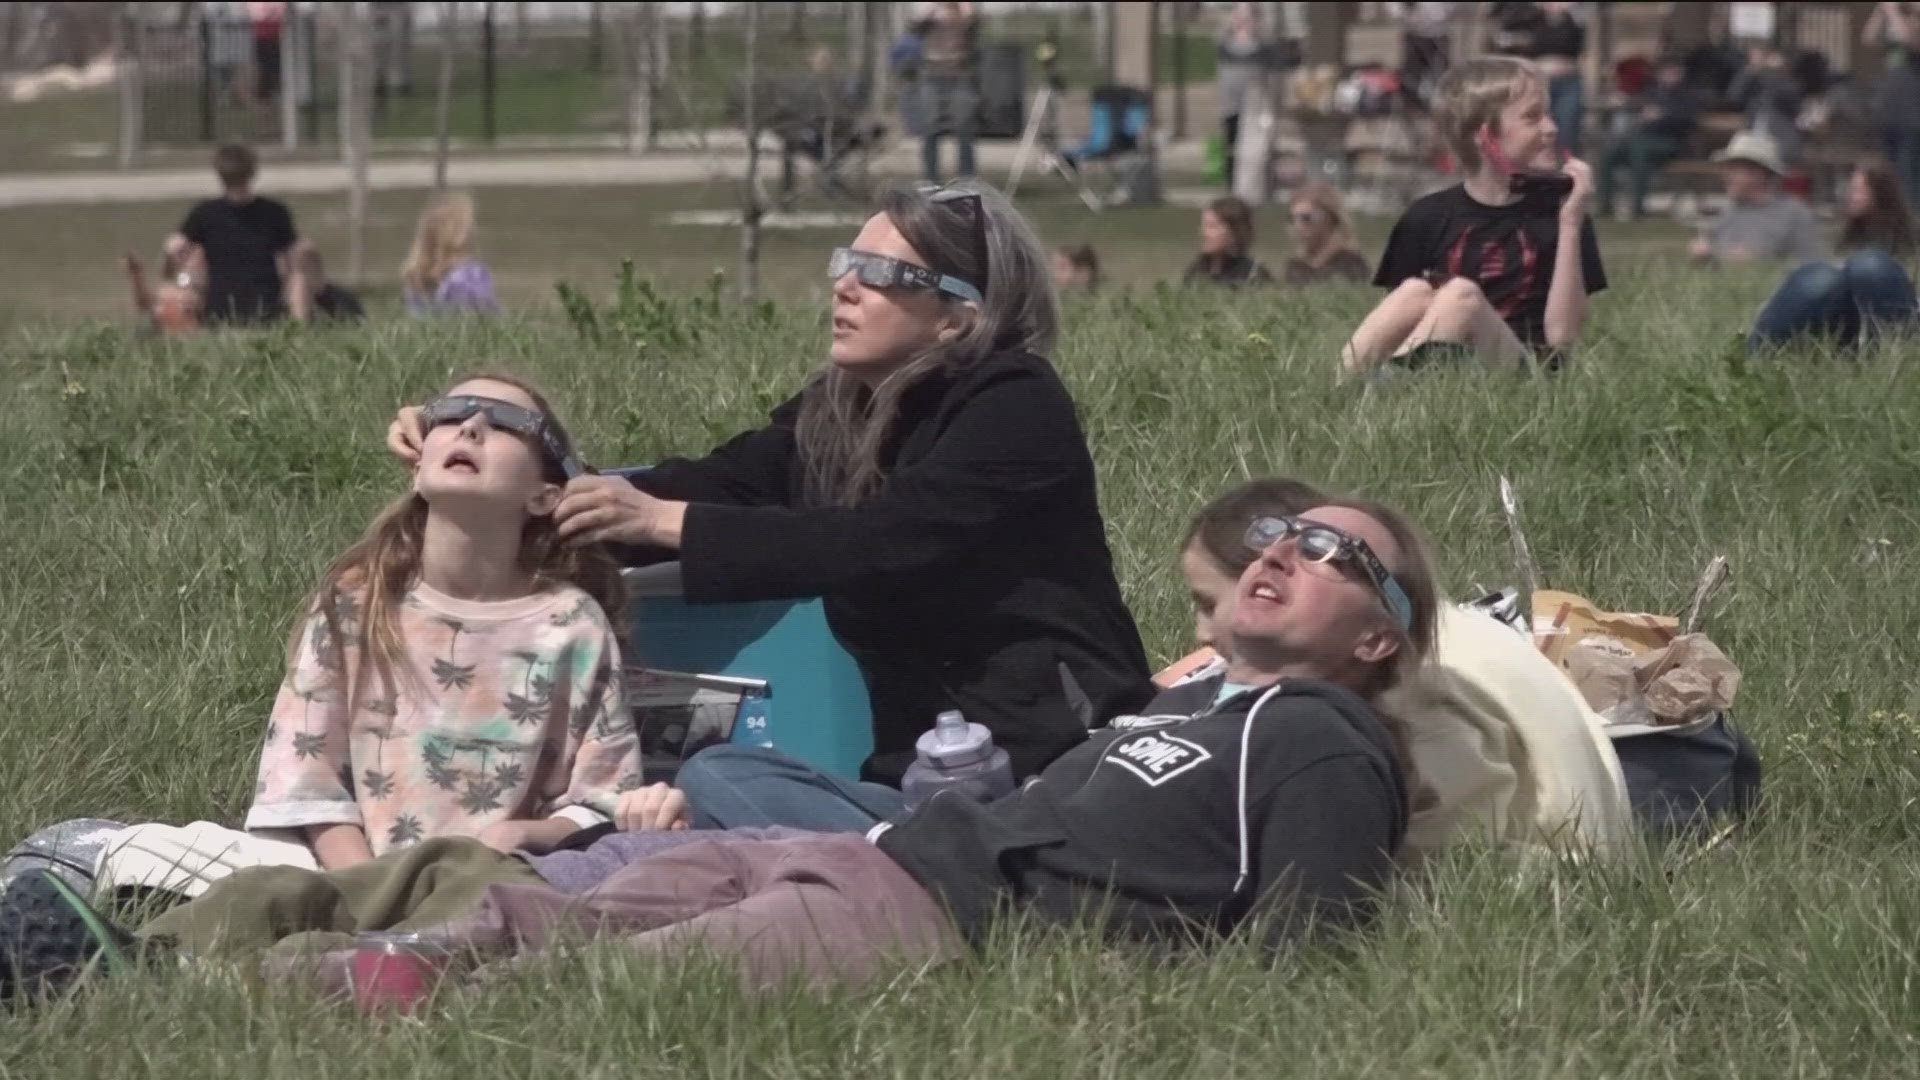 Medical professionals were concerned people would exercise risky behavior while viewing Monday's solar eclipse.